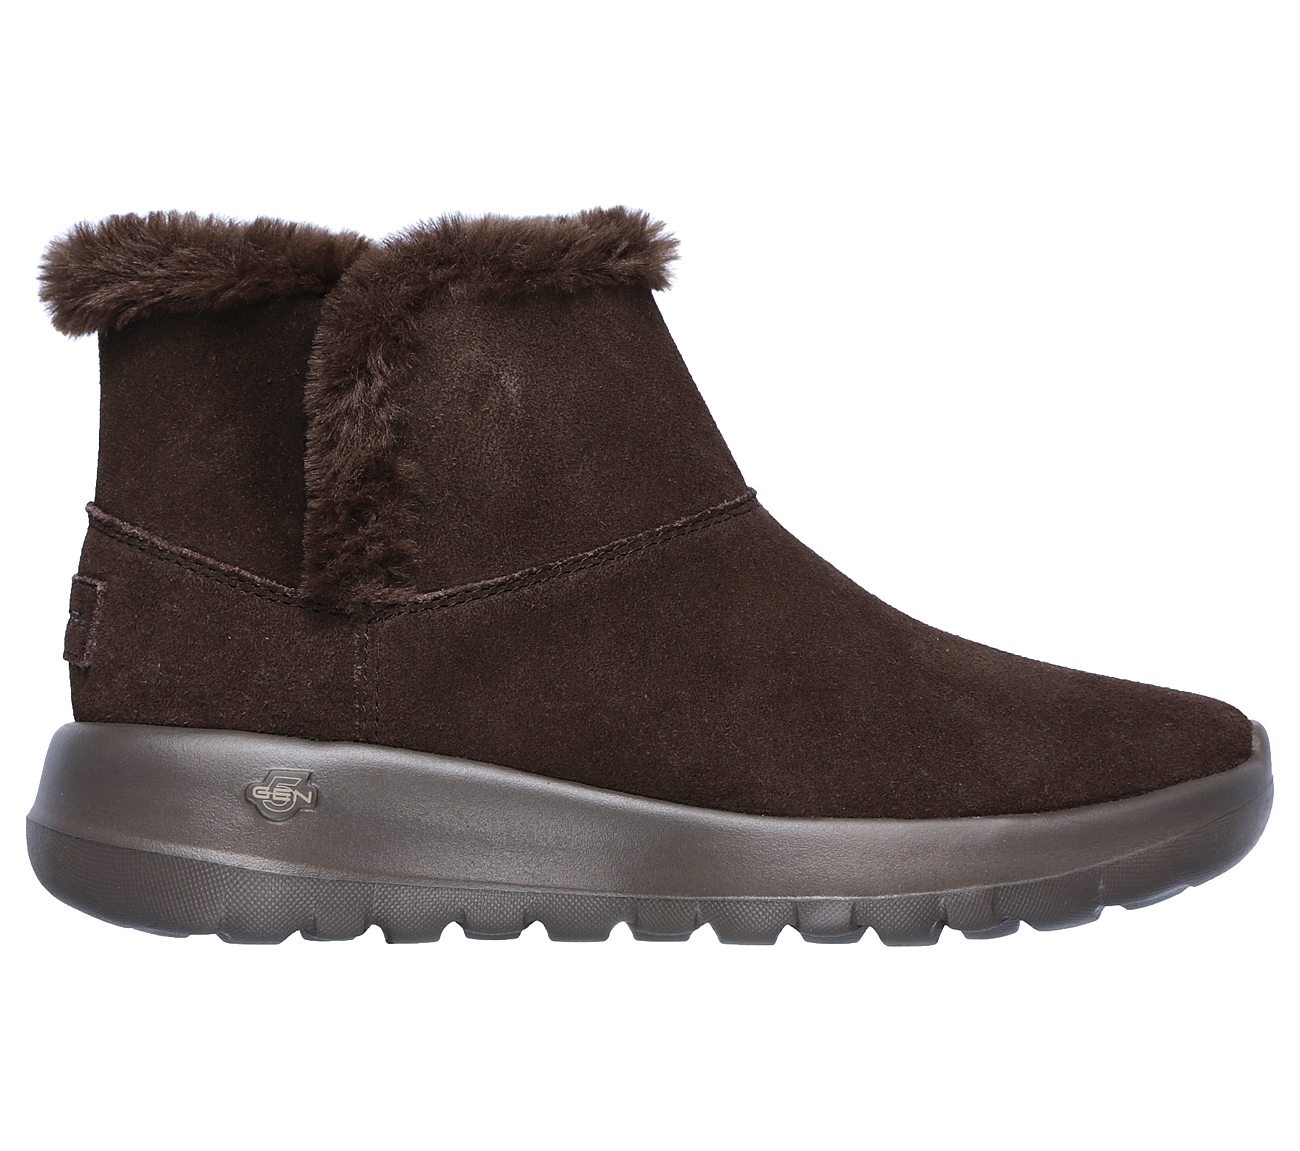 skechers ankle boots uk